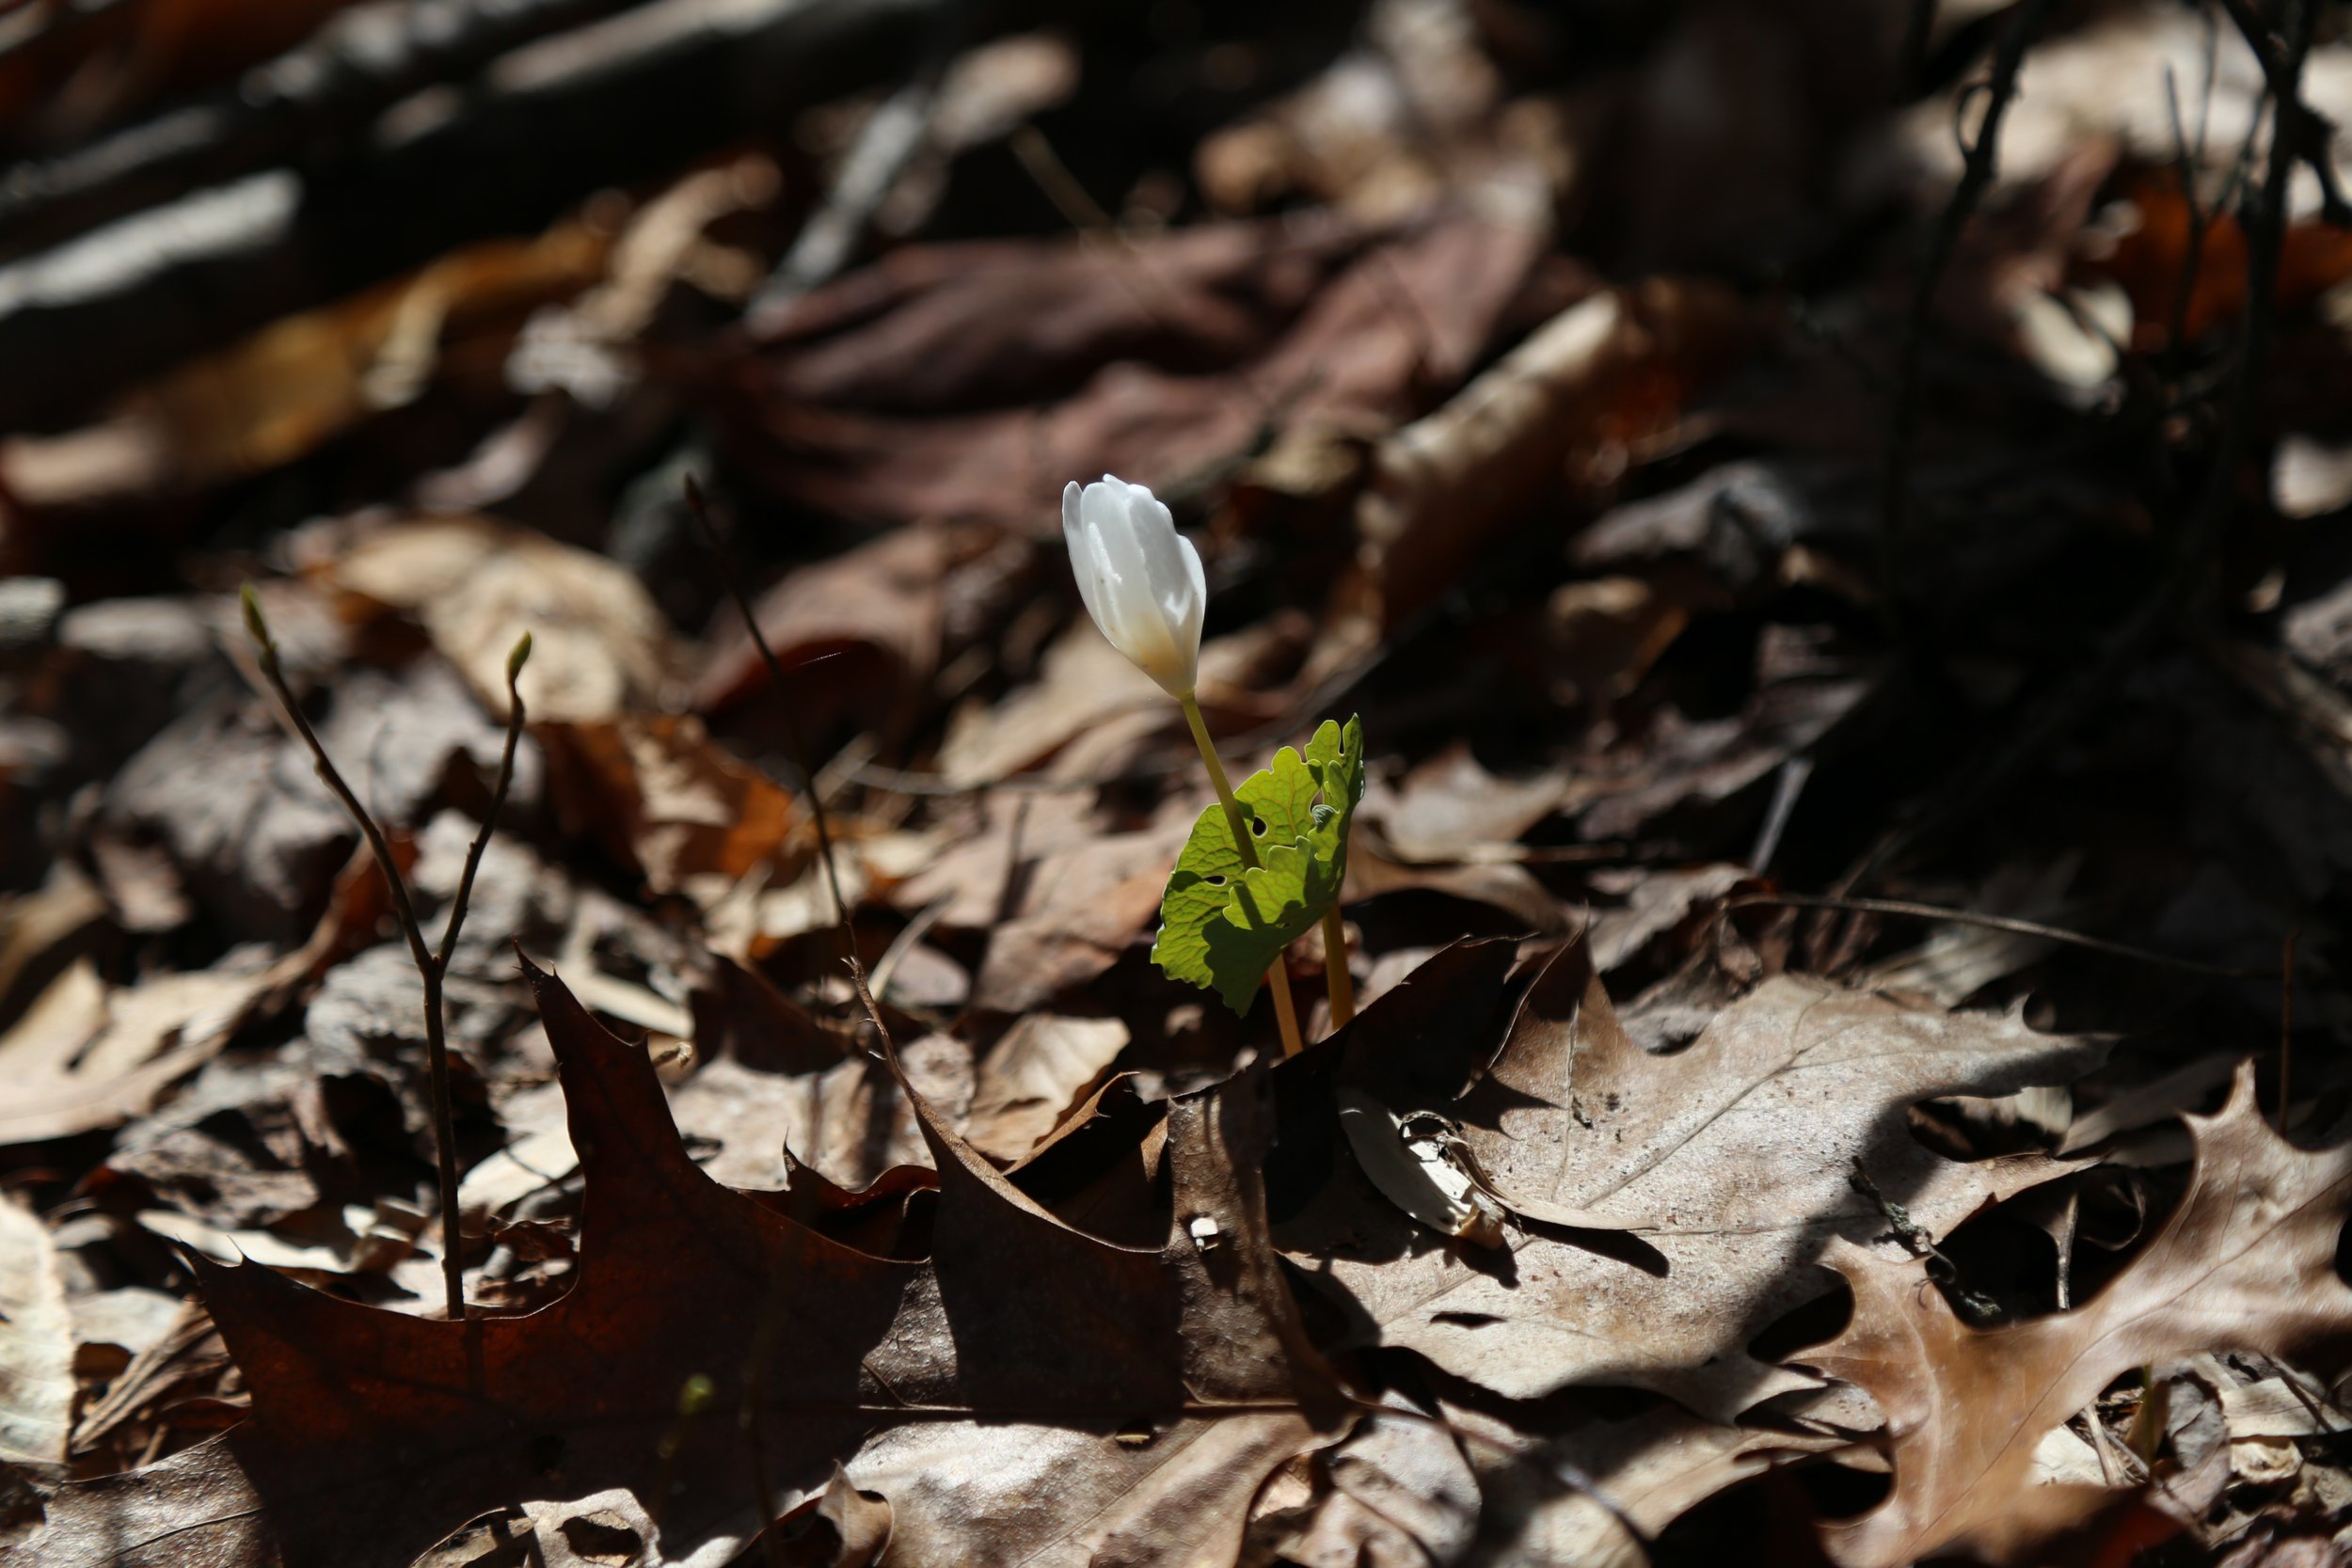  Bloodroot emerging from the leaves.  One of the first signs of life after winter. 